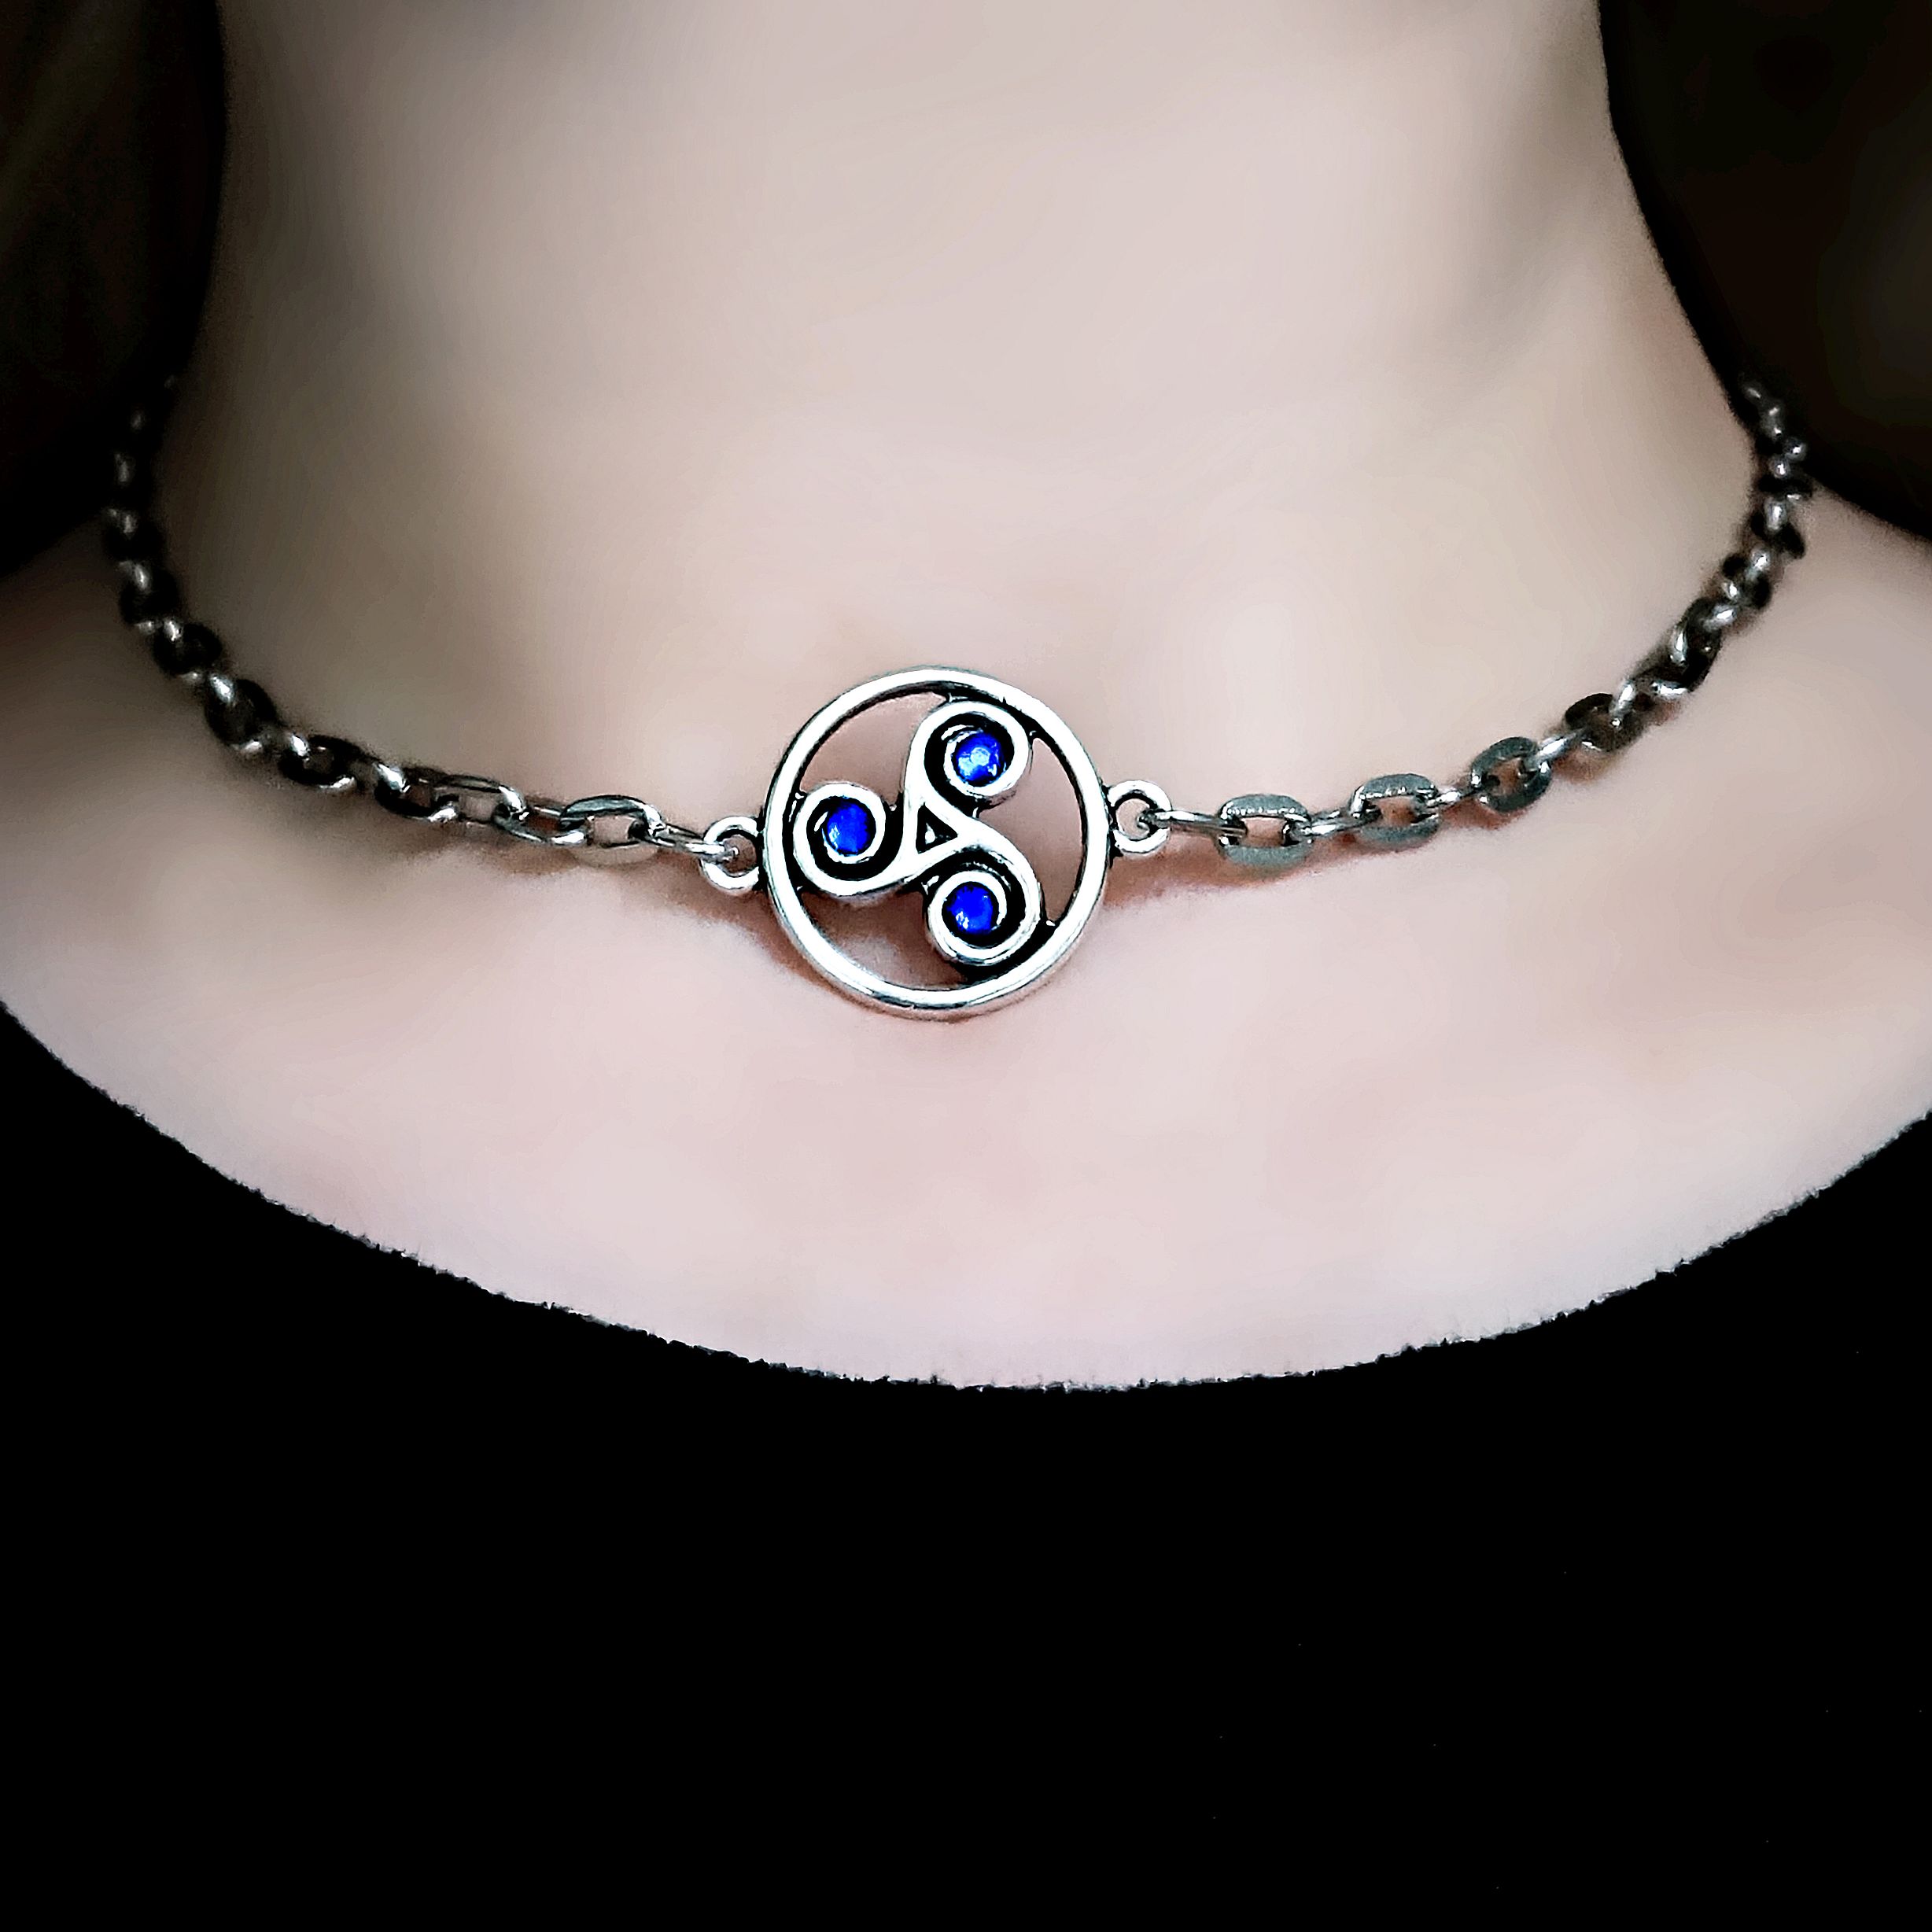 Steampunk BDSM jewelry symbol triskele day collar metal necklace submissive dominant.